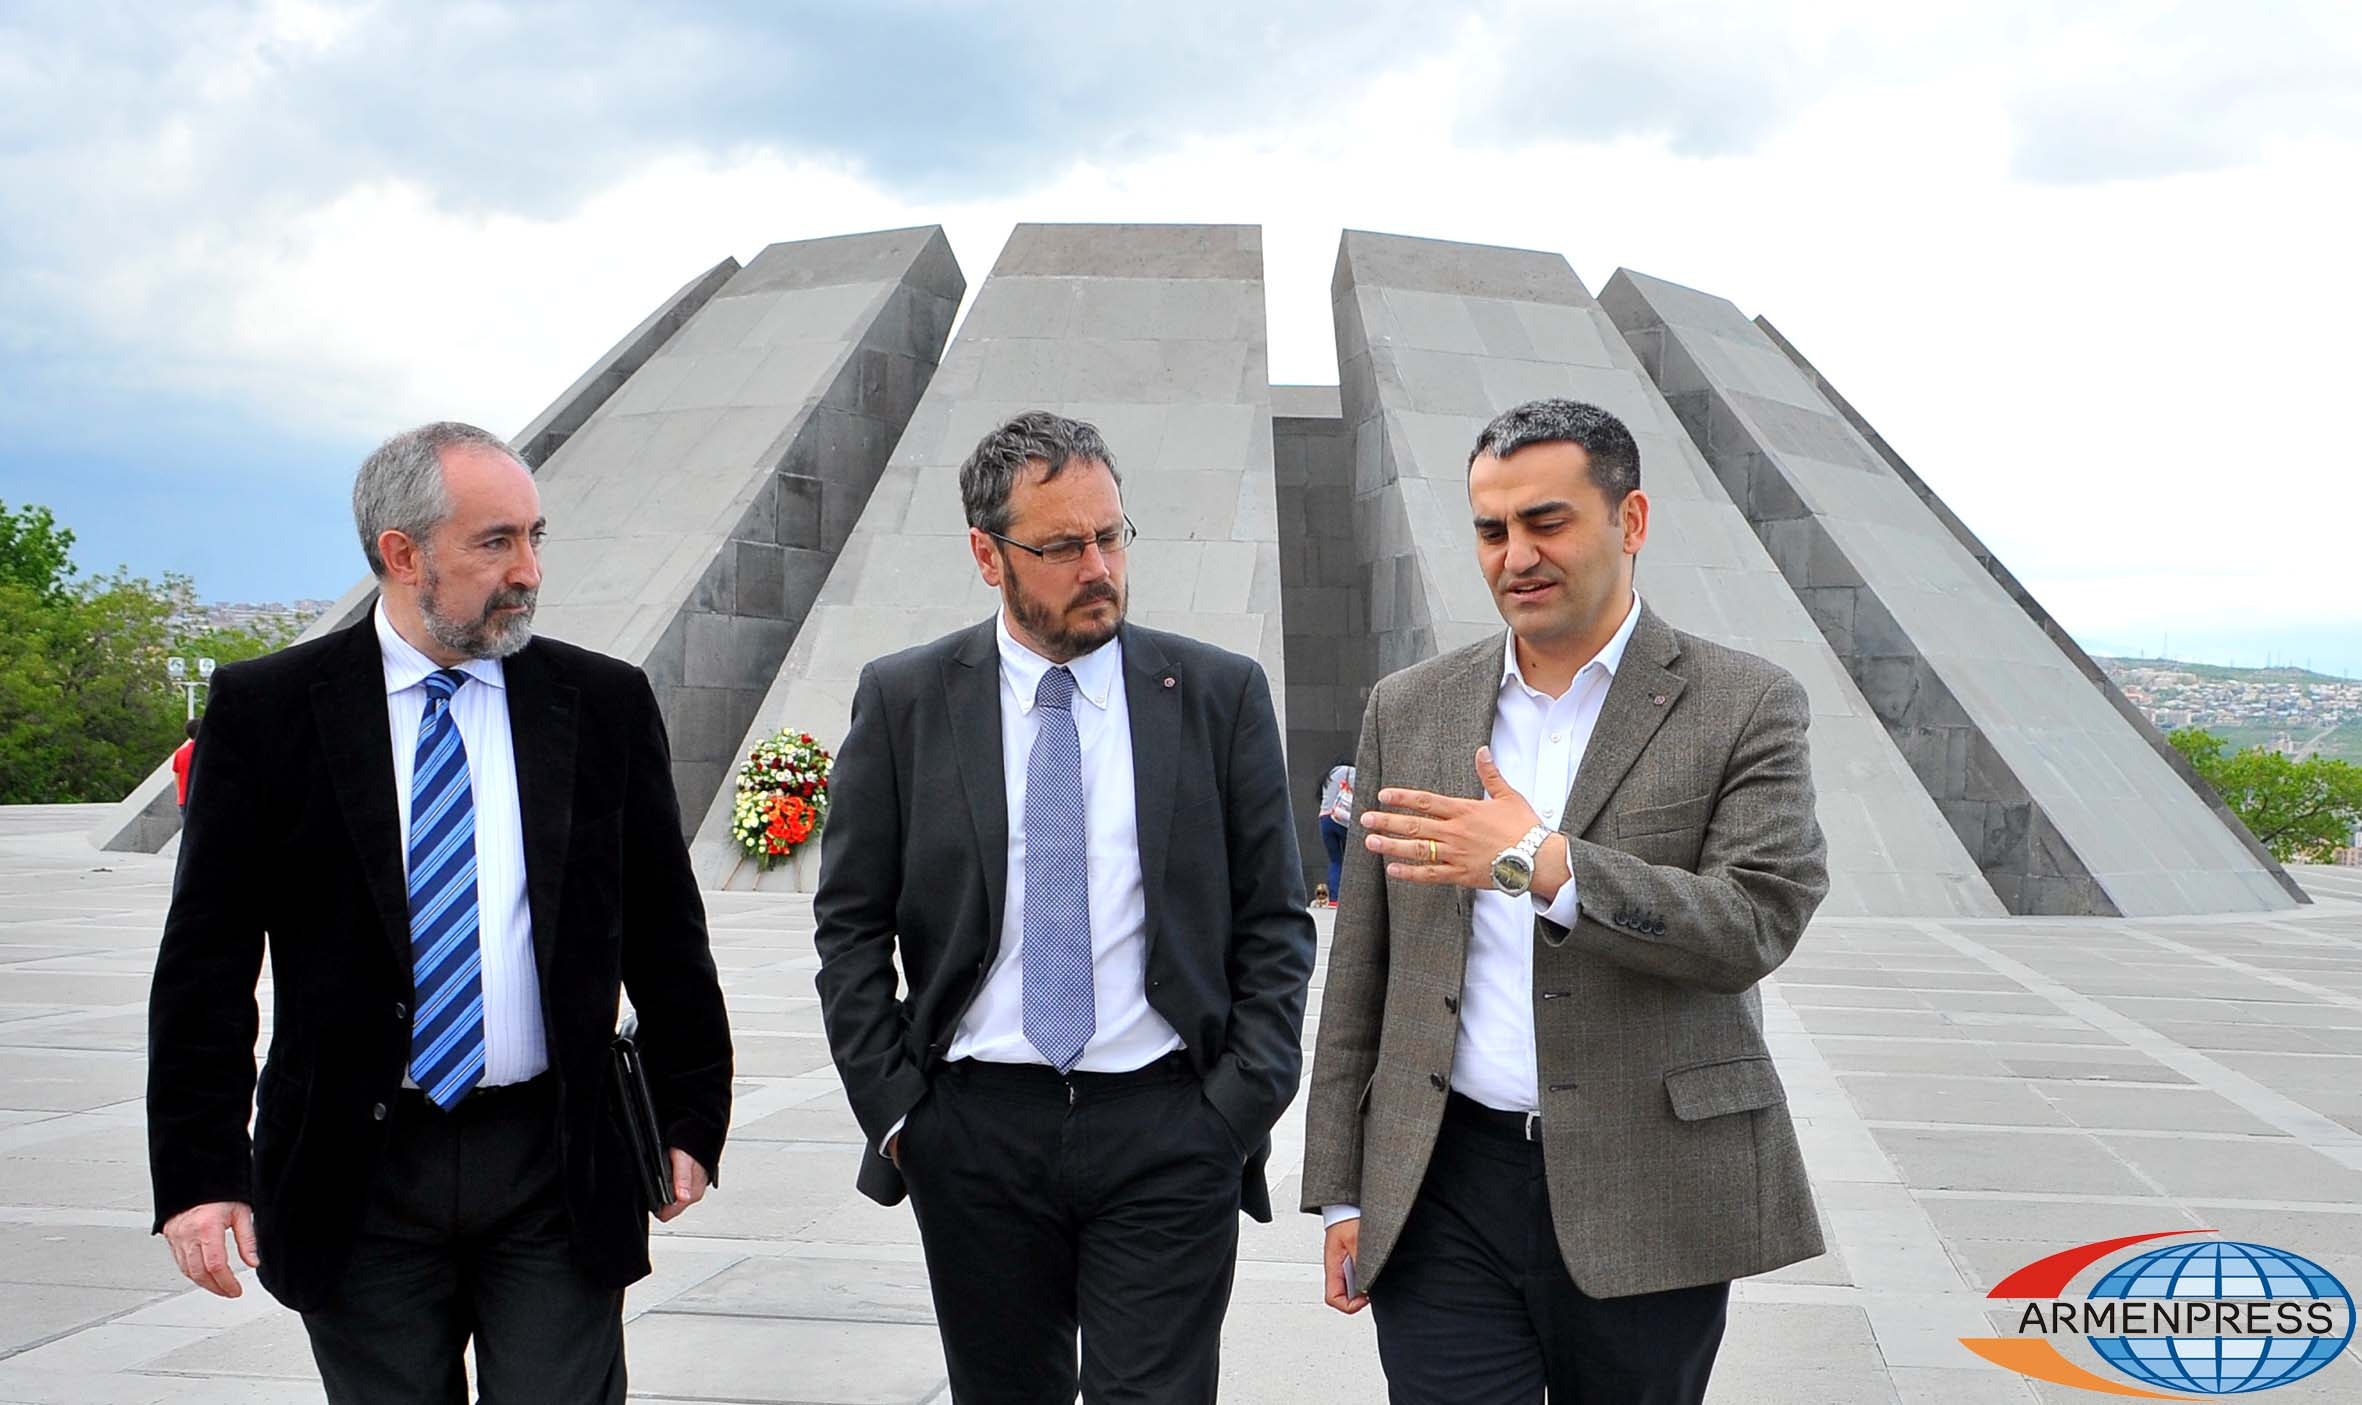 Spain’s lawmakers pledge to raise Armenian Genocide issue at all levels
